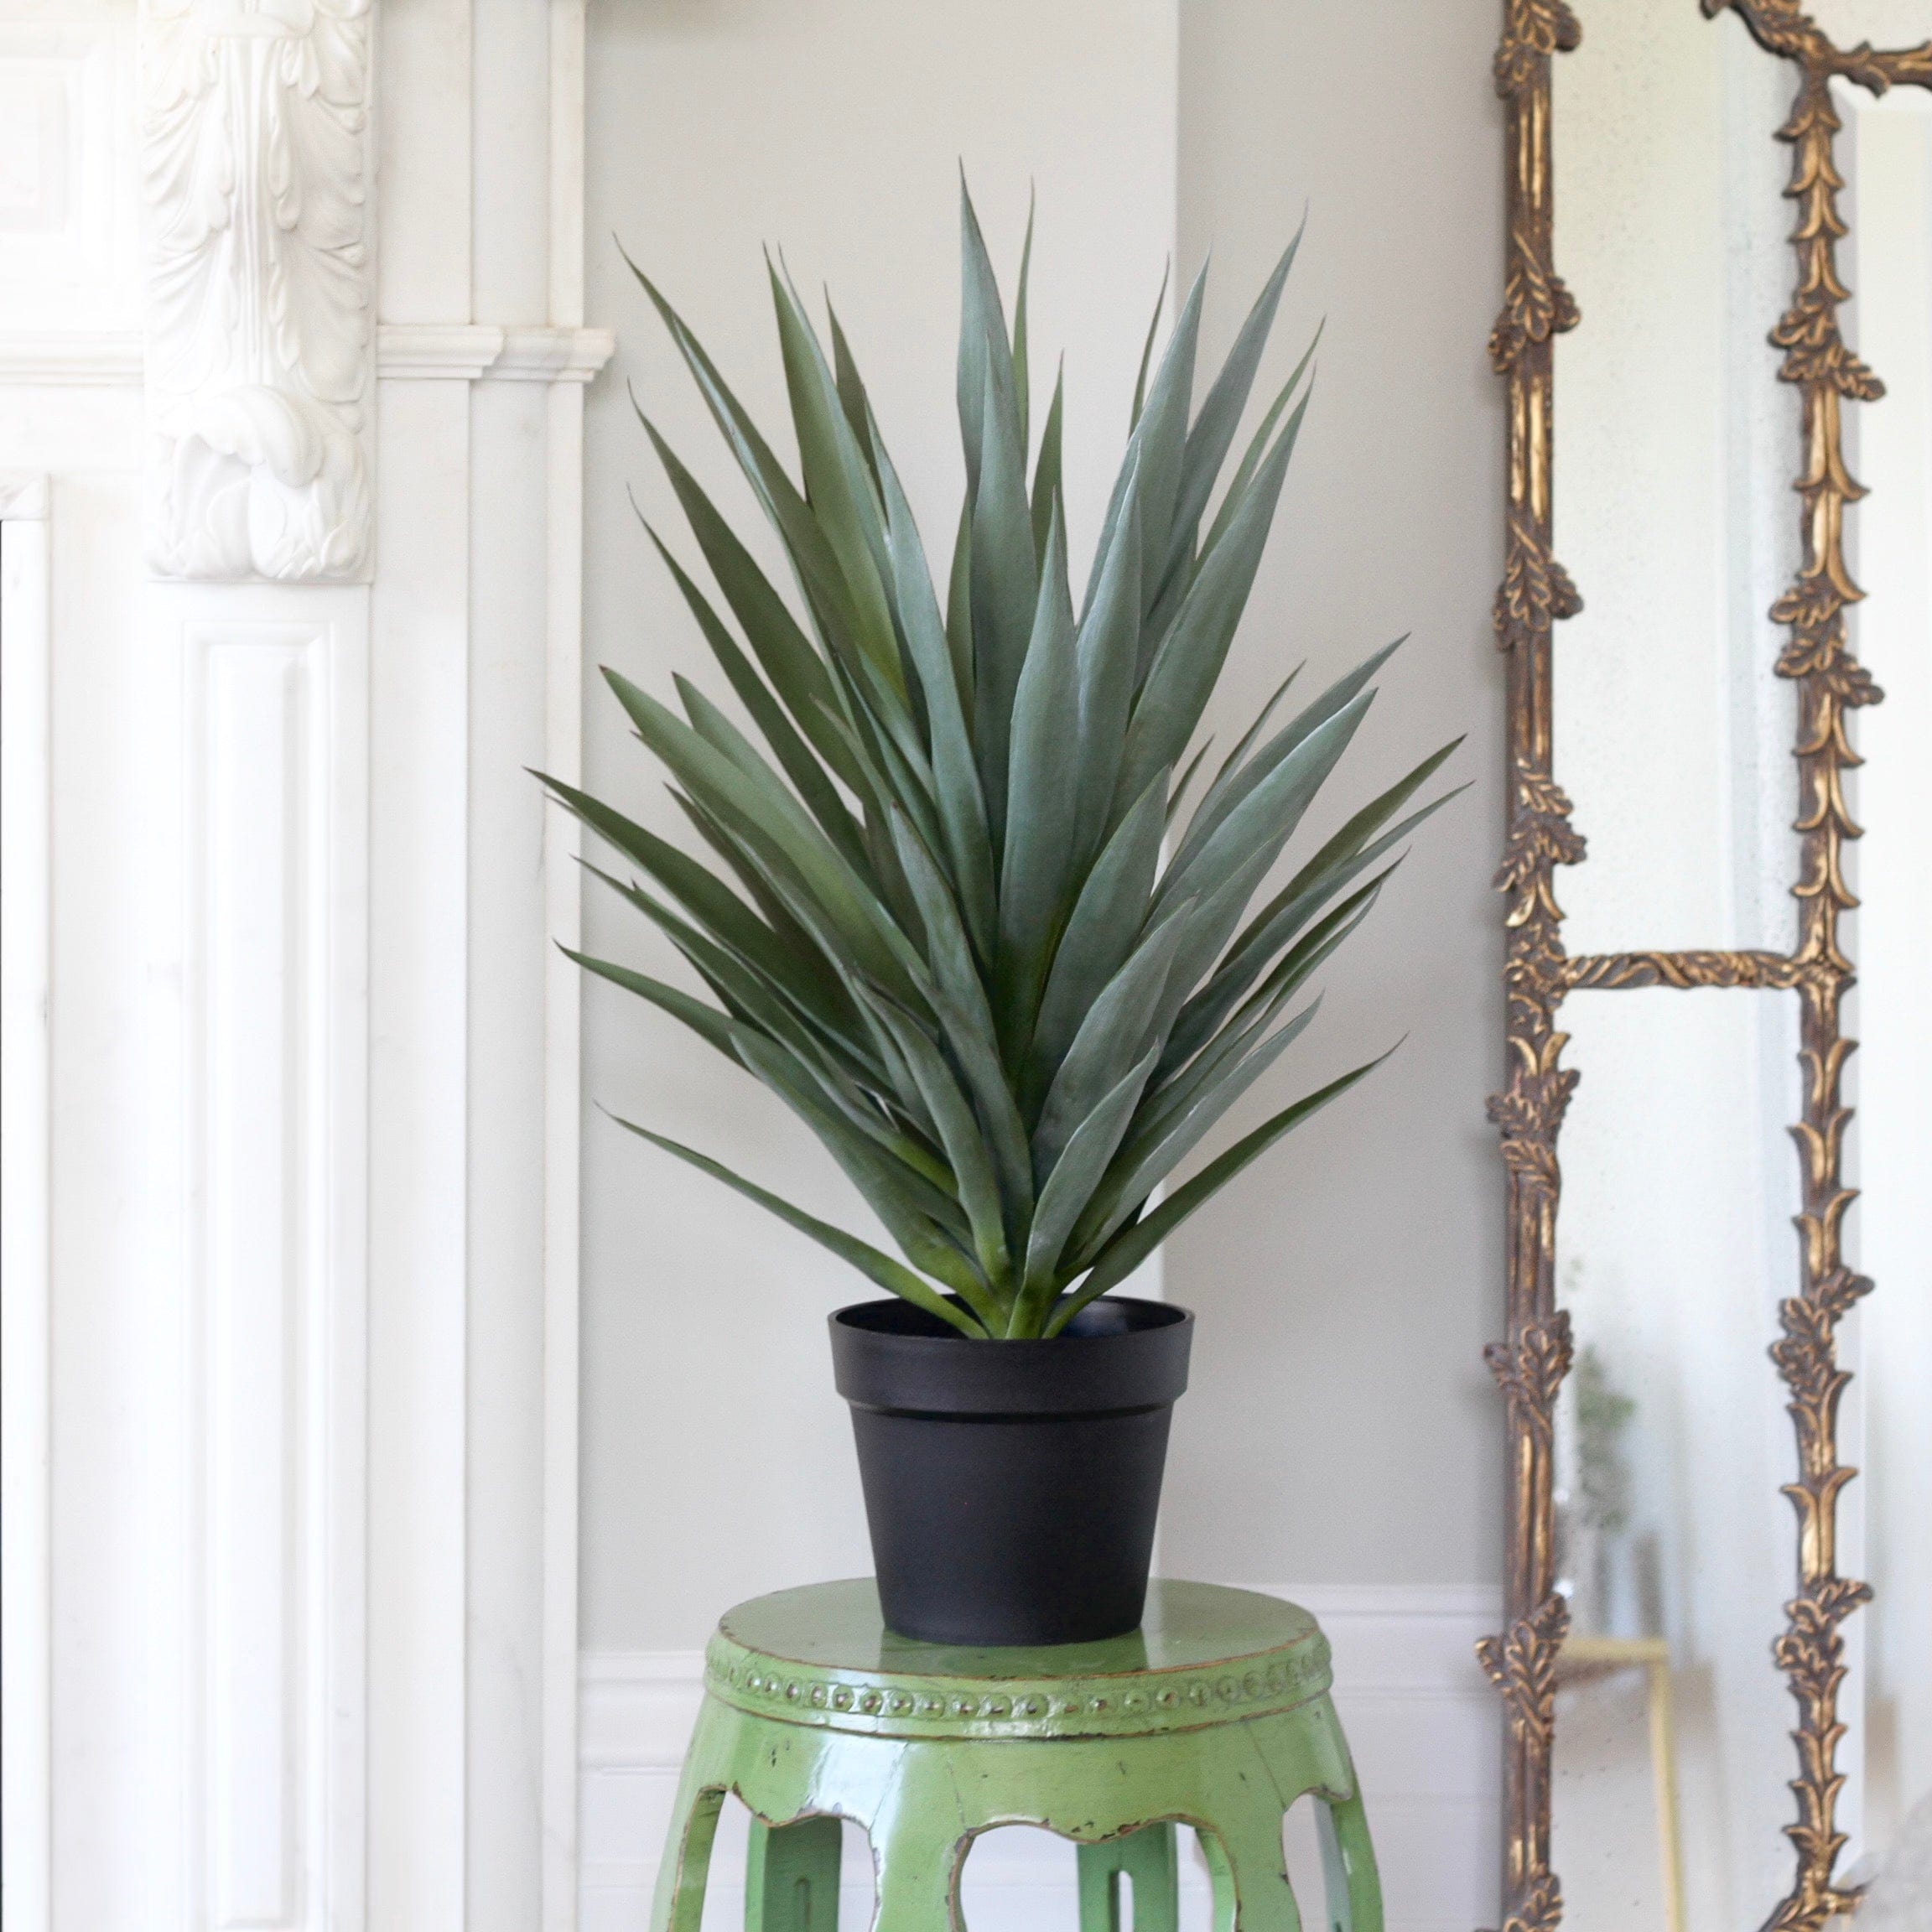 This artificial yucca plant in pot is the most realistic artificial indoor plant in the UK, a perfect small artificial plant from Amaranthine Blooms UK